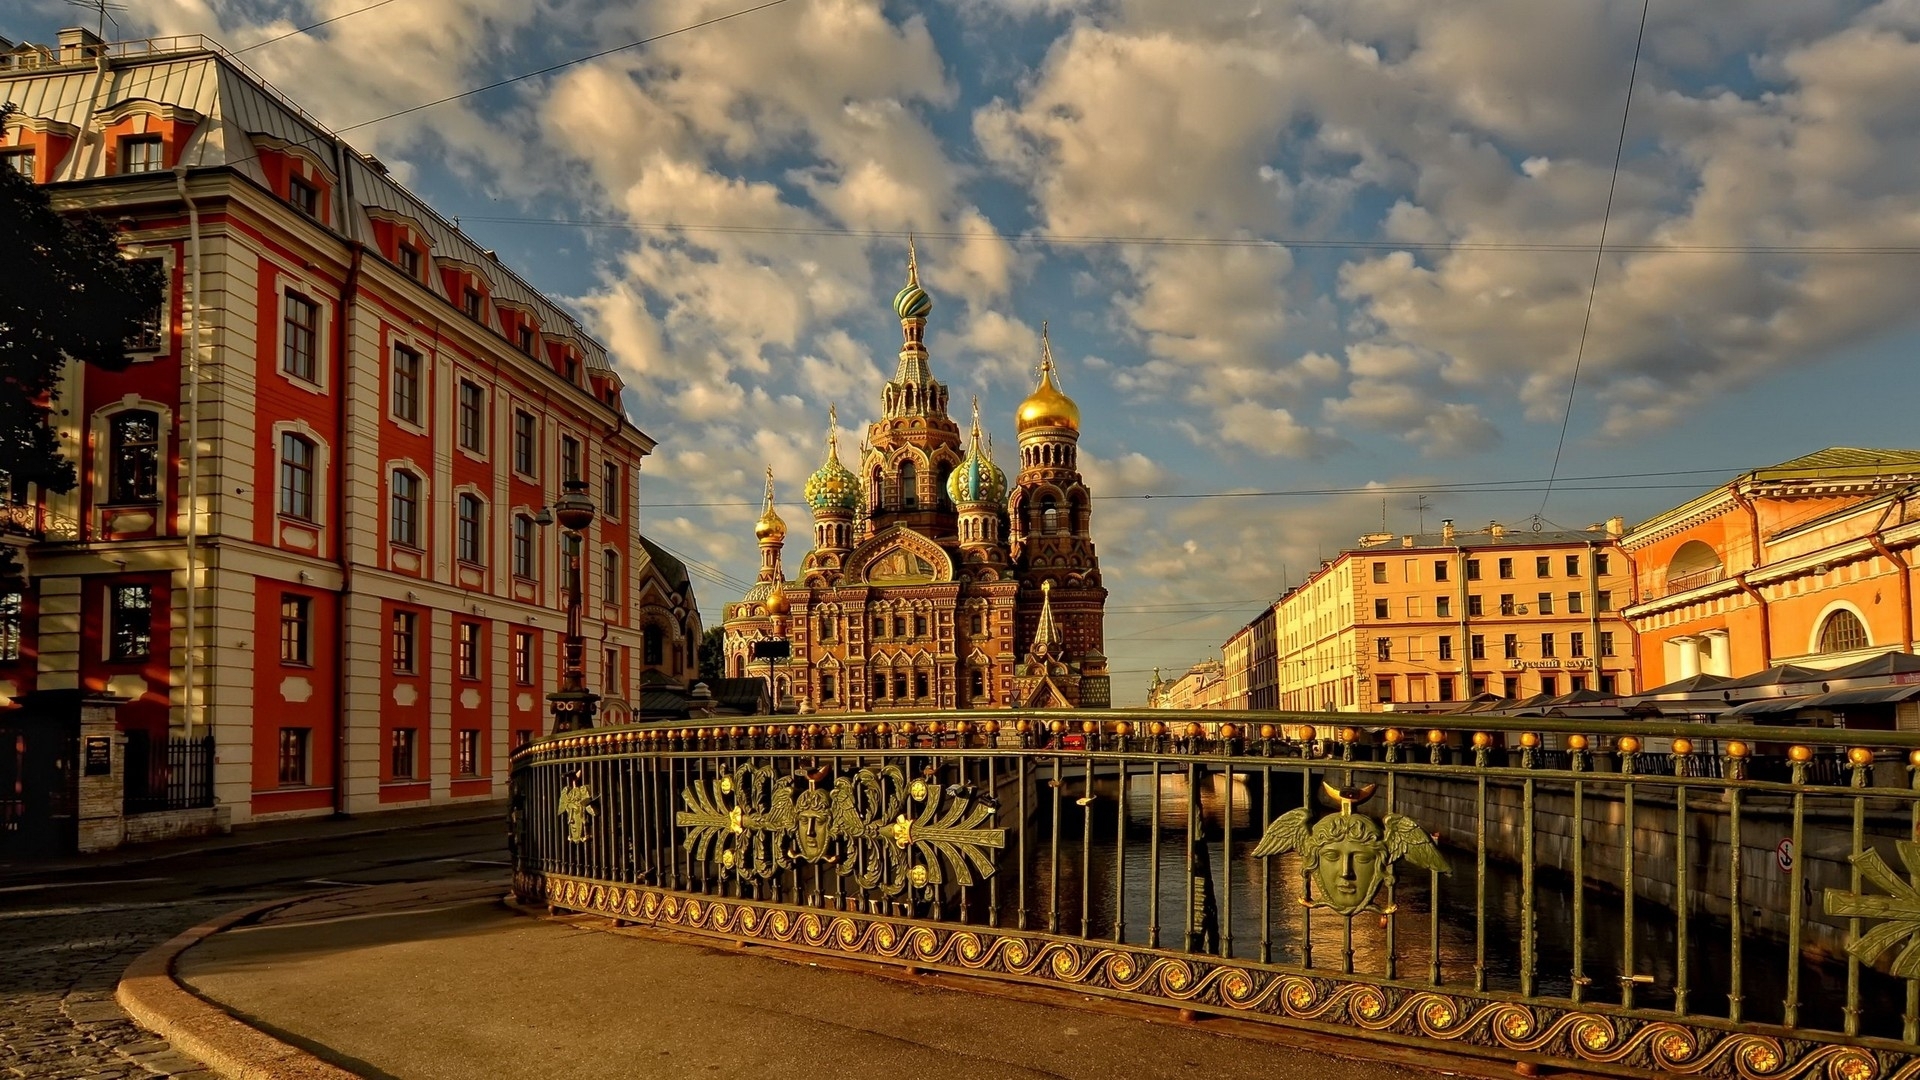 Get lost in the 18th century culture A literary Sankt Petersburg